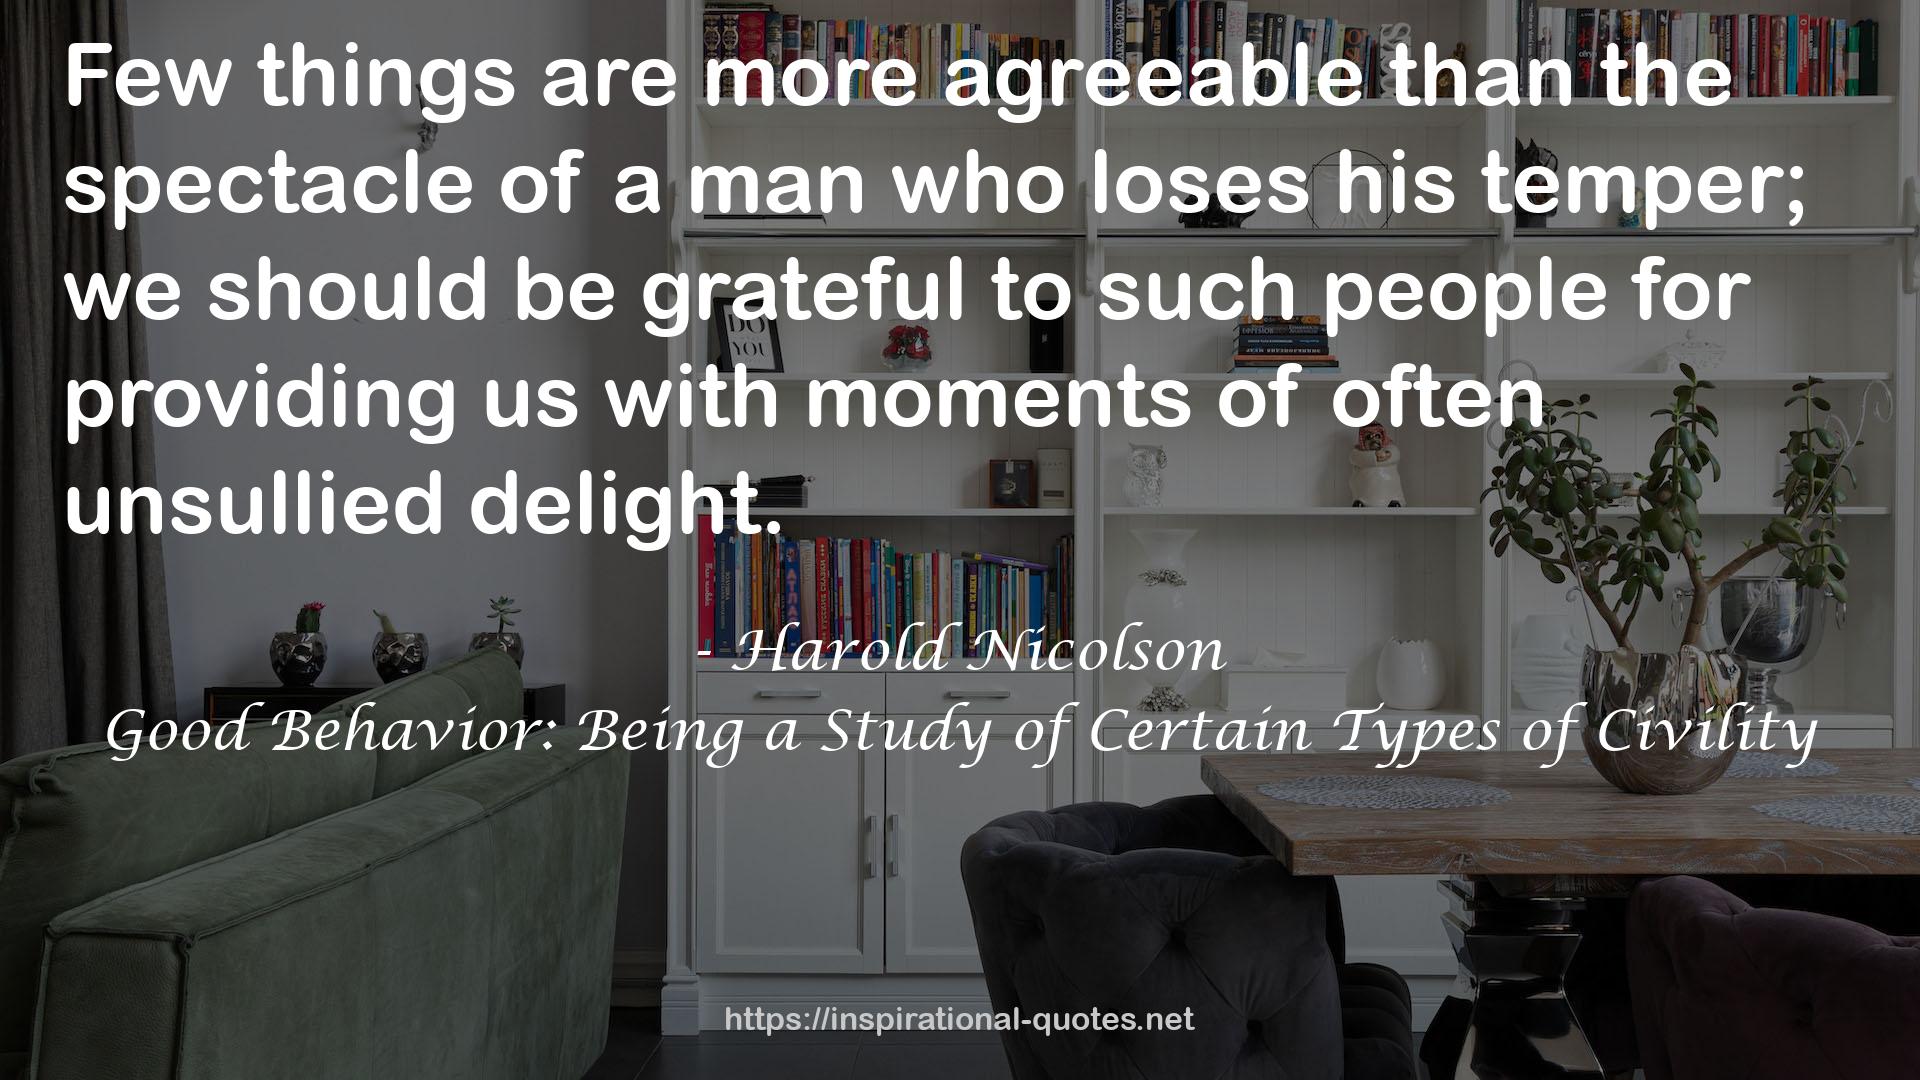 Good Behavior: Being a Study of Certain Types of Civility QUOTES